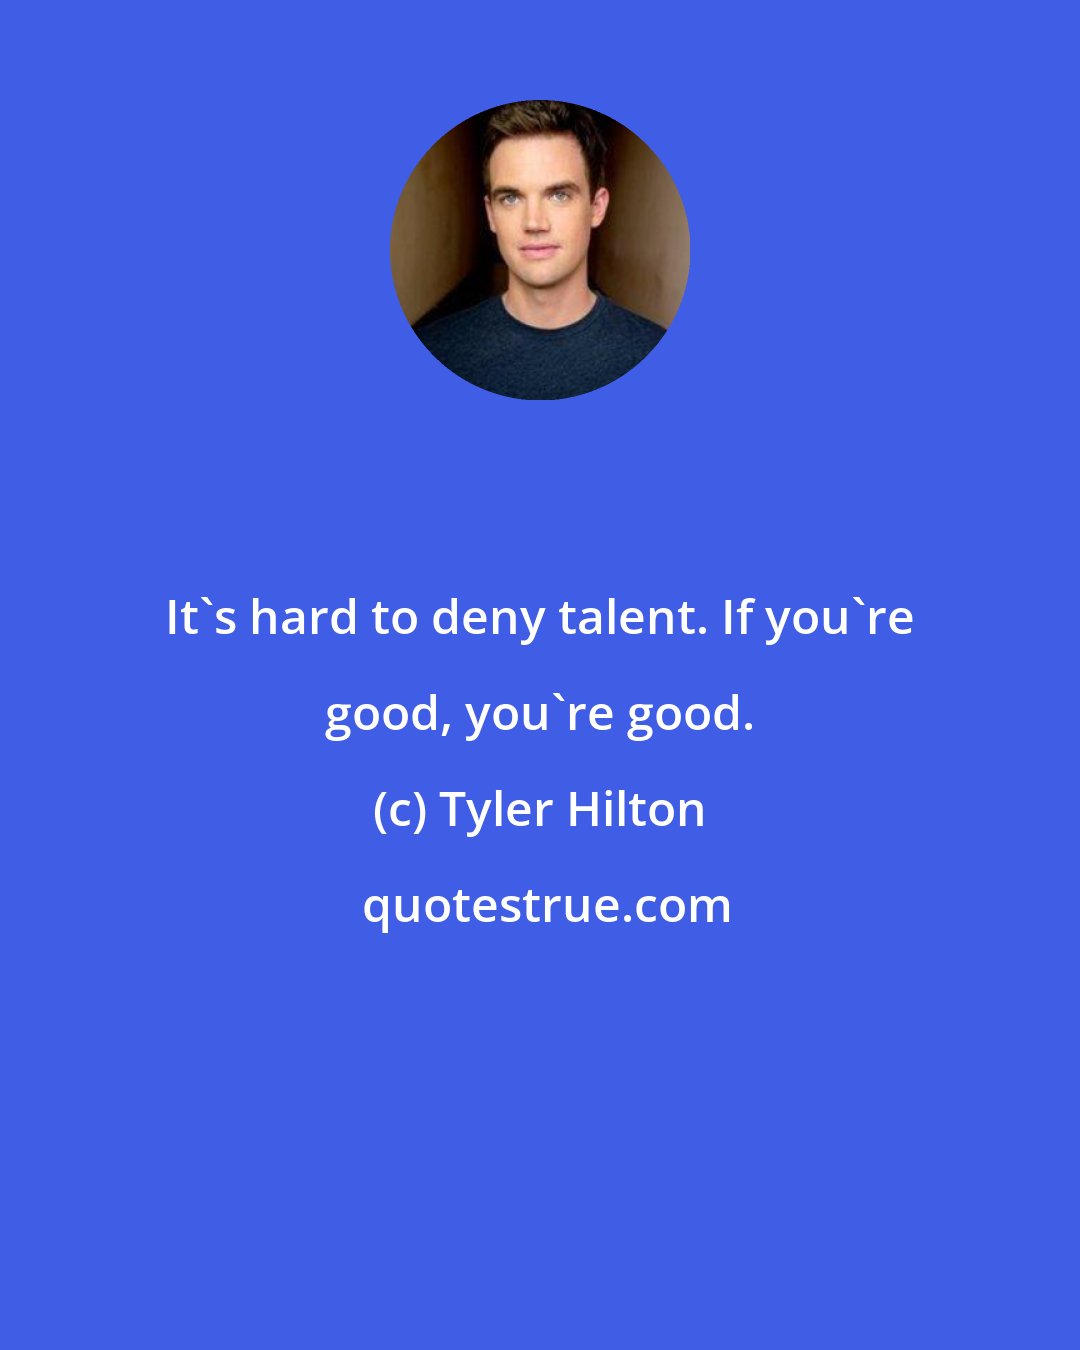 Tyler Hilton: It's hard to deny talent. If you're good, you're good.